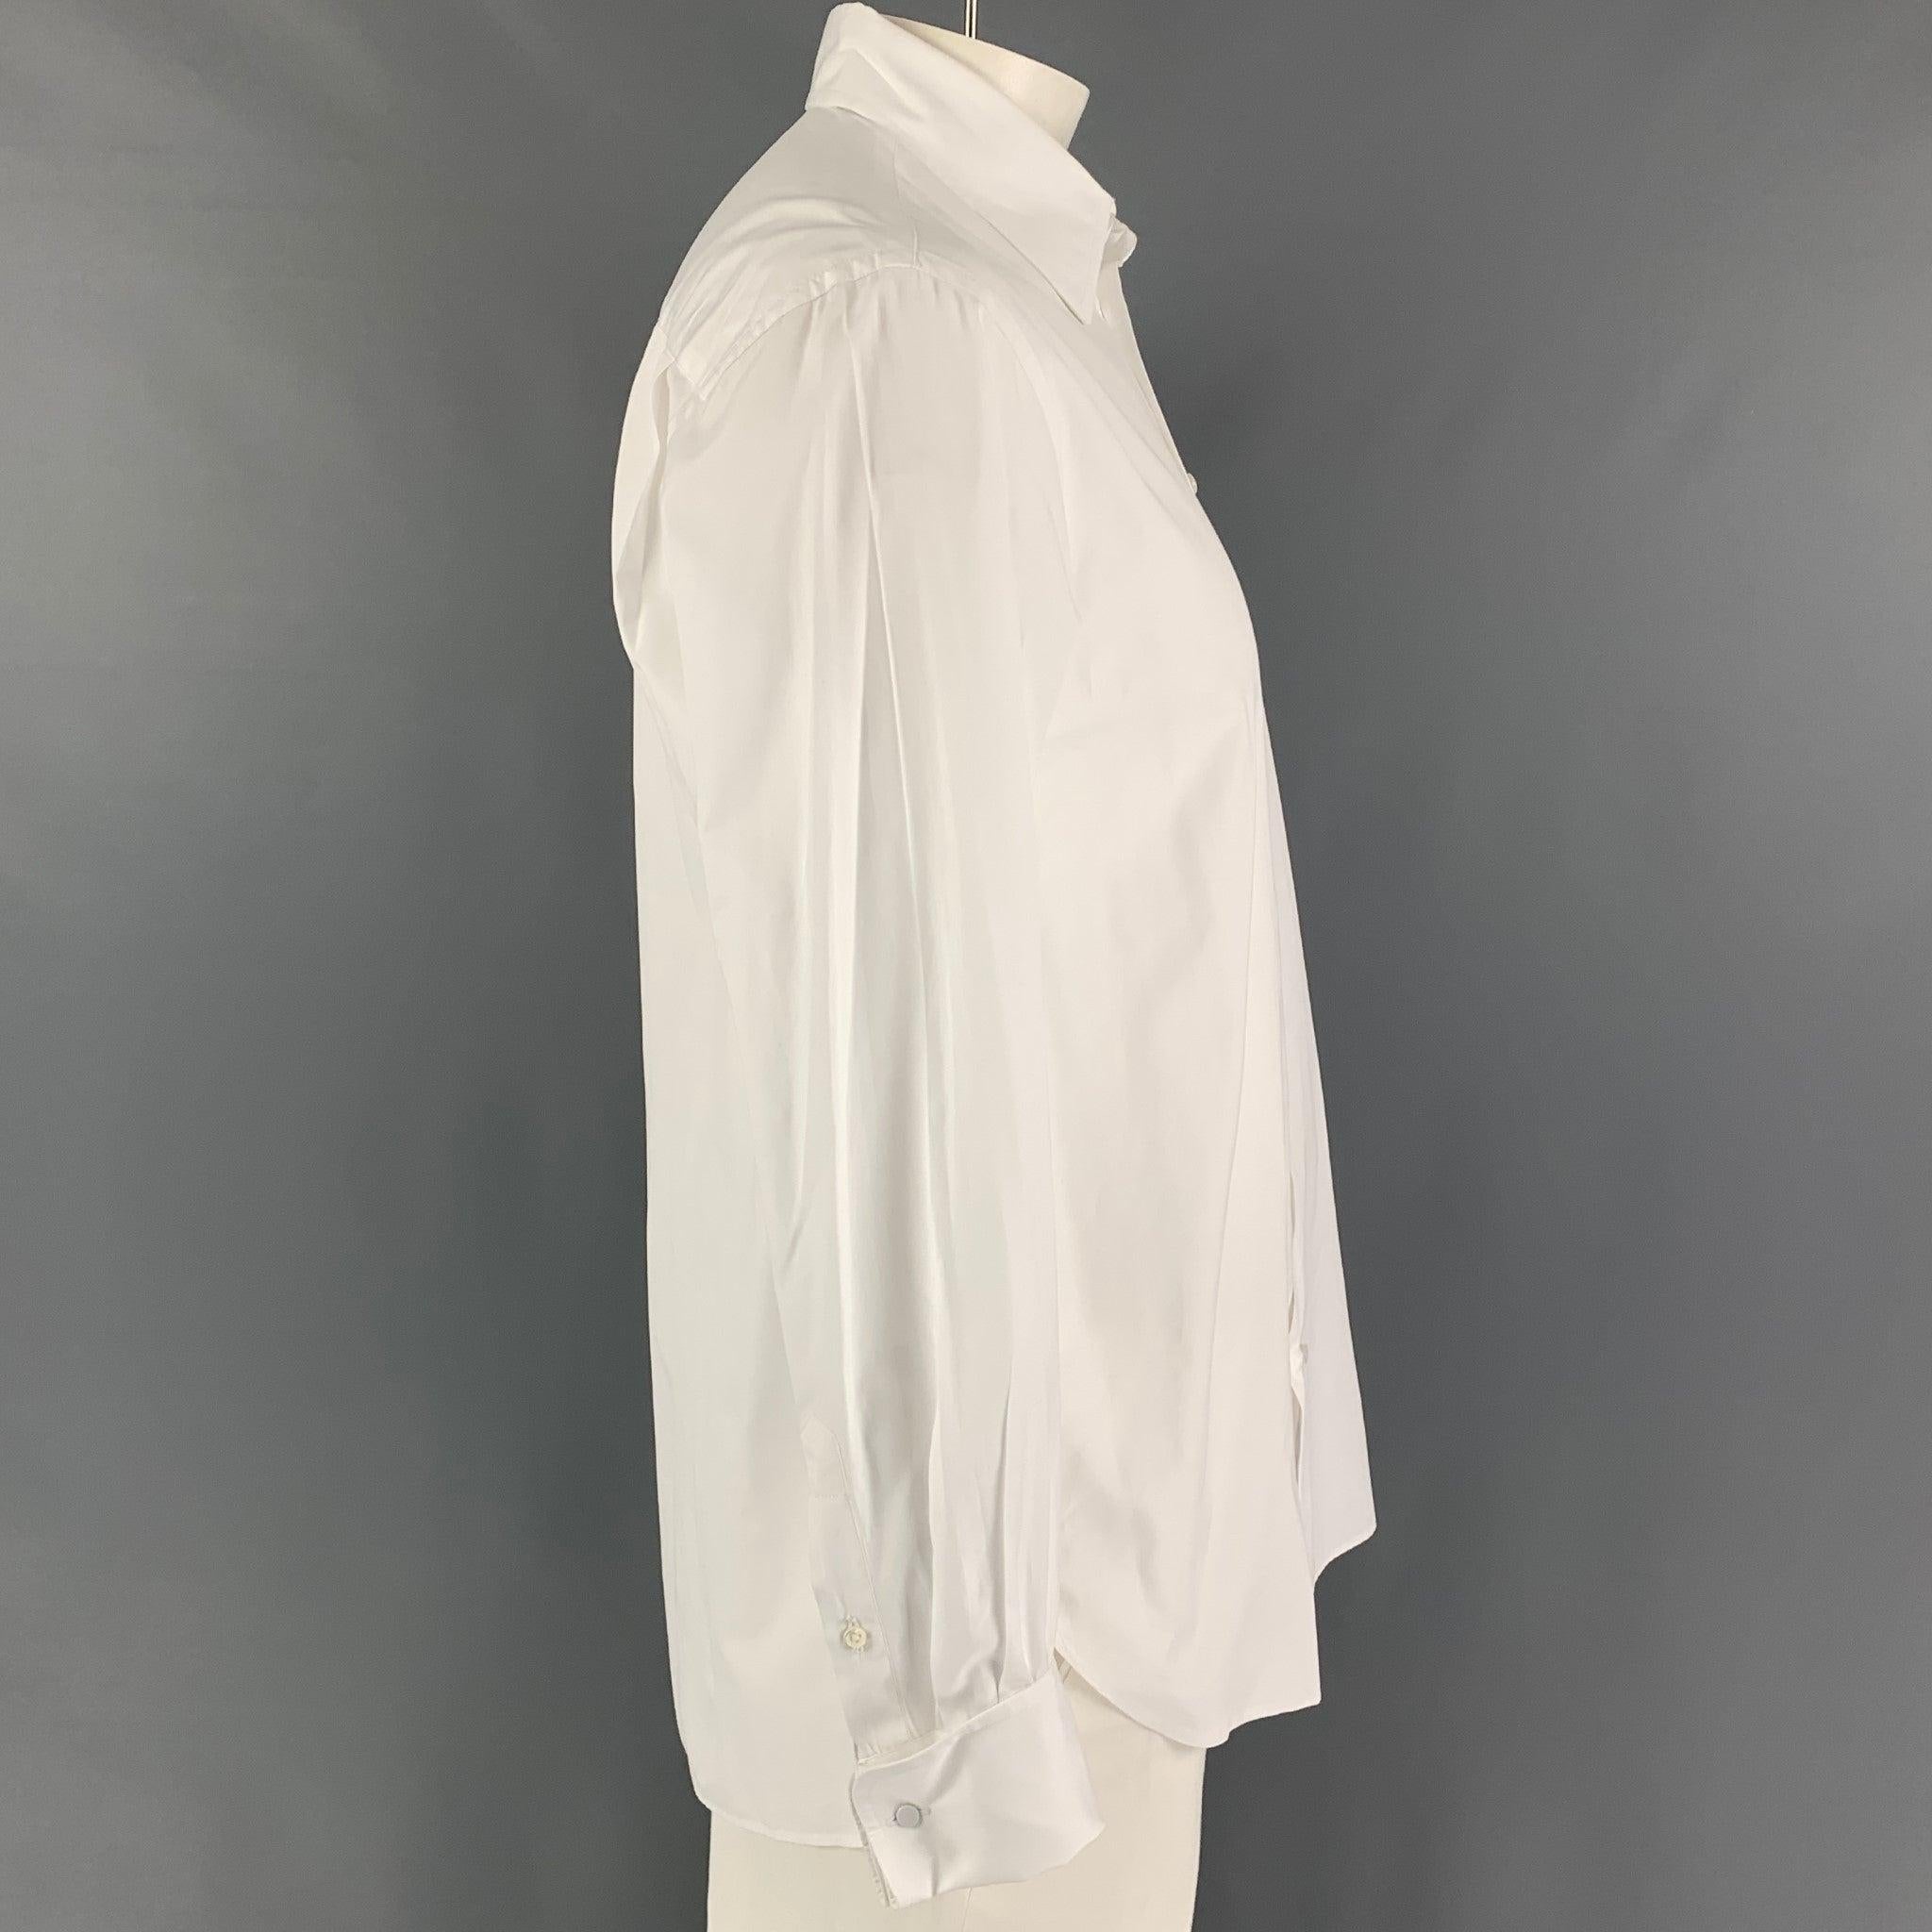 GIORGIO ARMANI long sleeve shirt comes in a white cotton featuring a classic style, spread collar, french cuffs, and a button up closure. Cufflinks not included. Made in Italy. Excellent Pre-Owned Condition. 
 

 Marked:  40/15 3-4 
 

